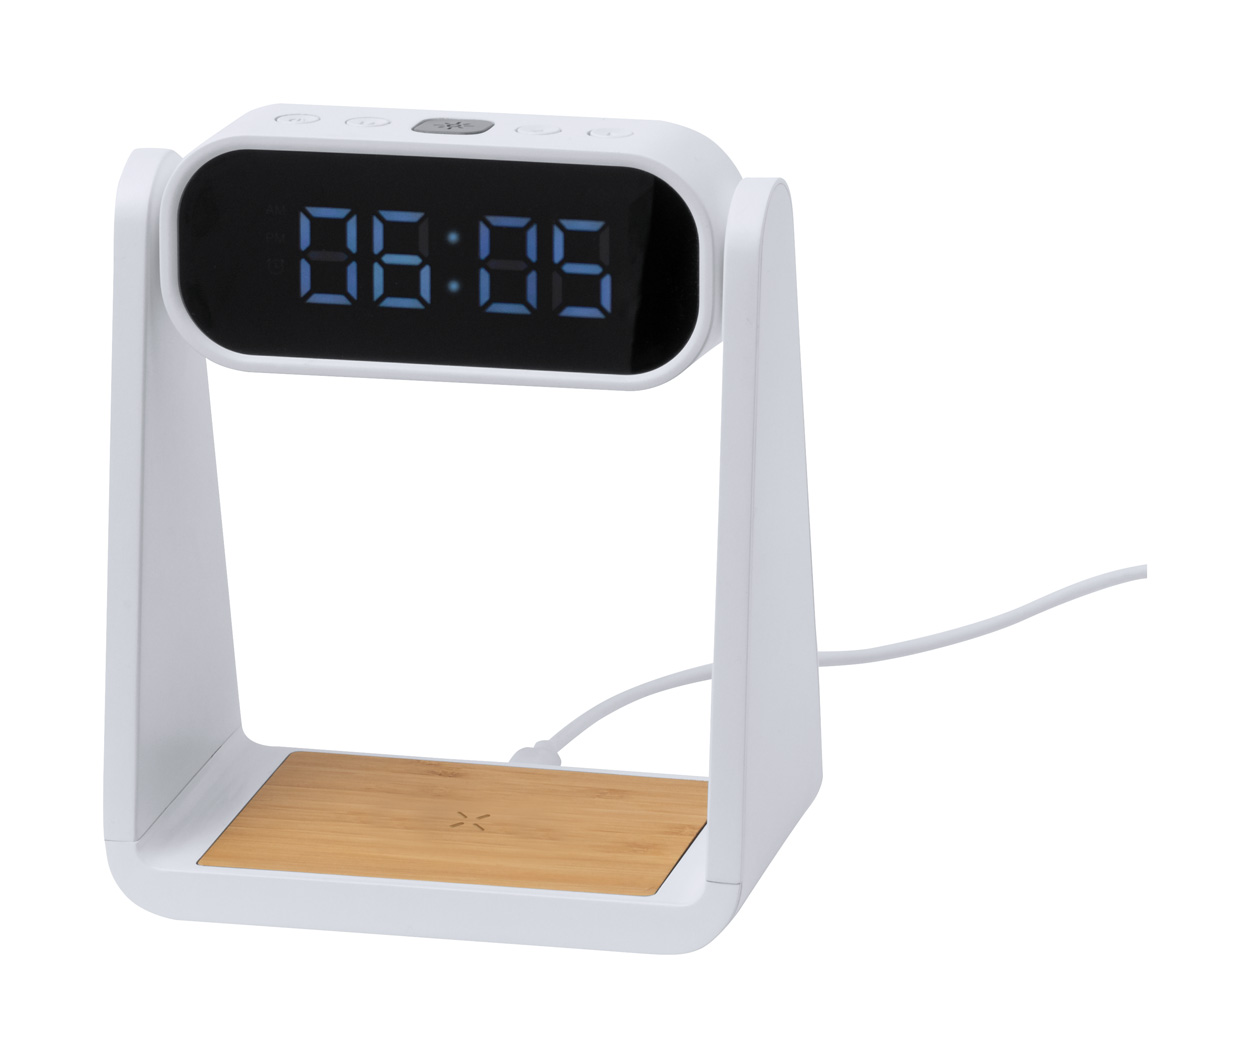 Darret alarm clock with wireless charger - white